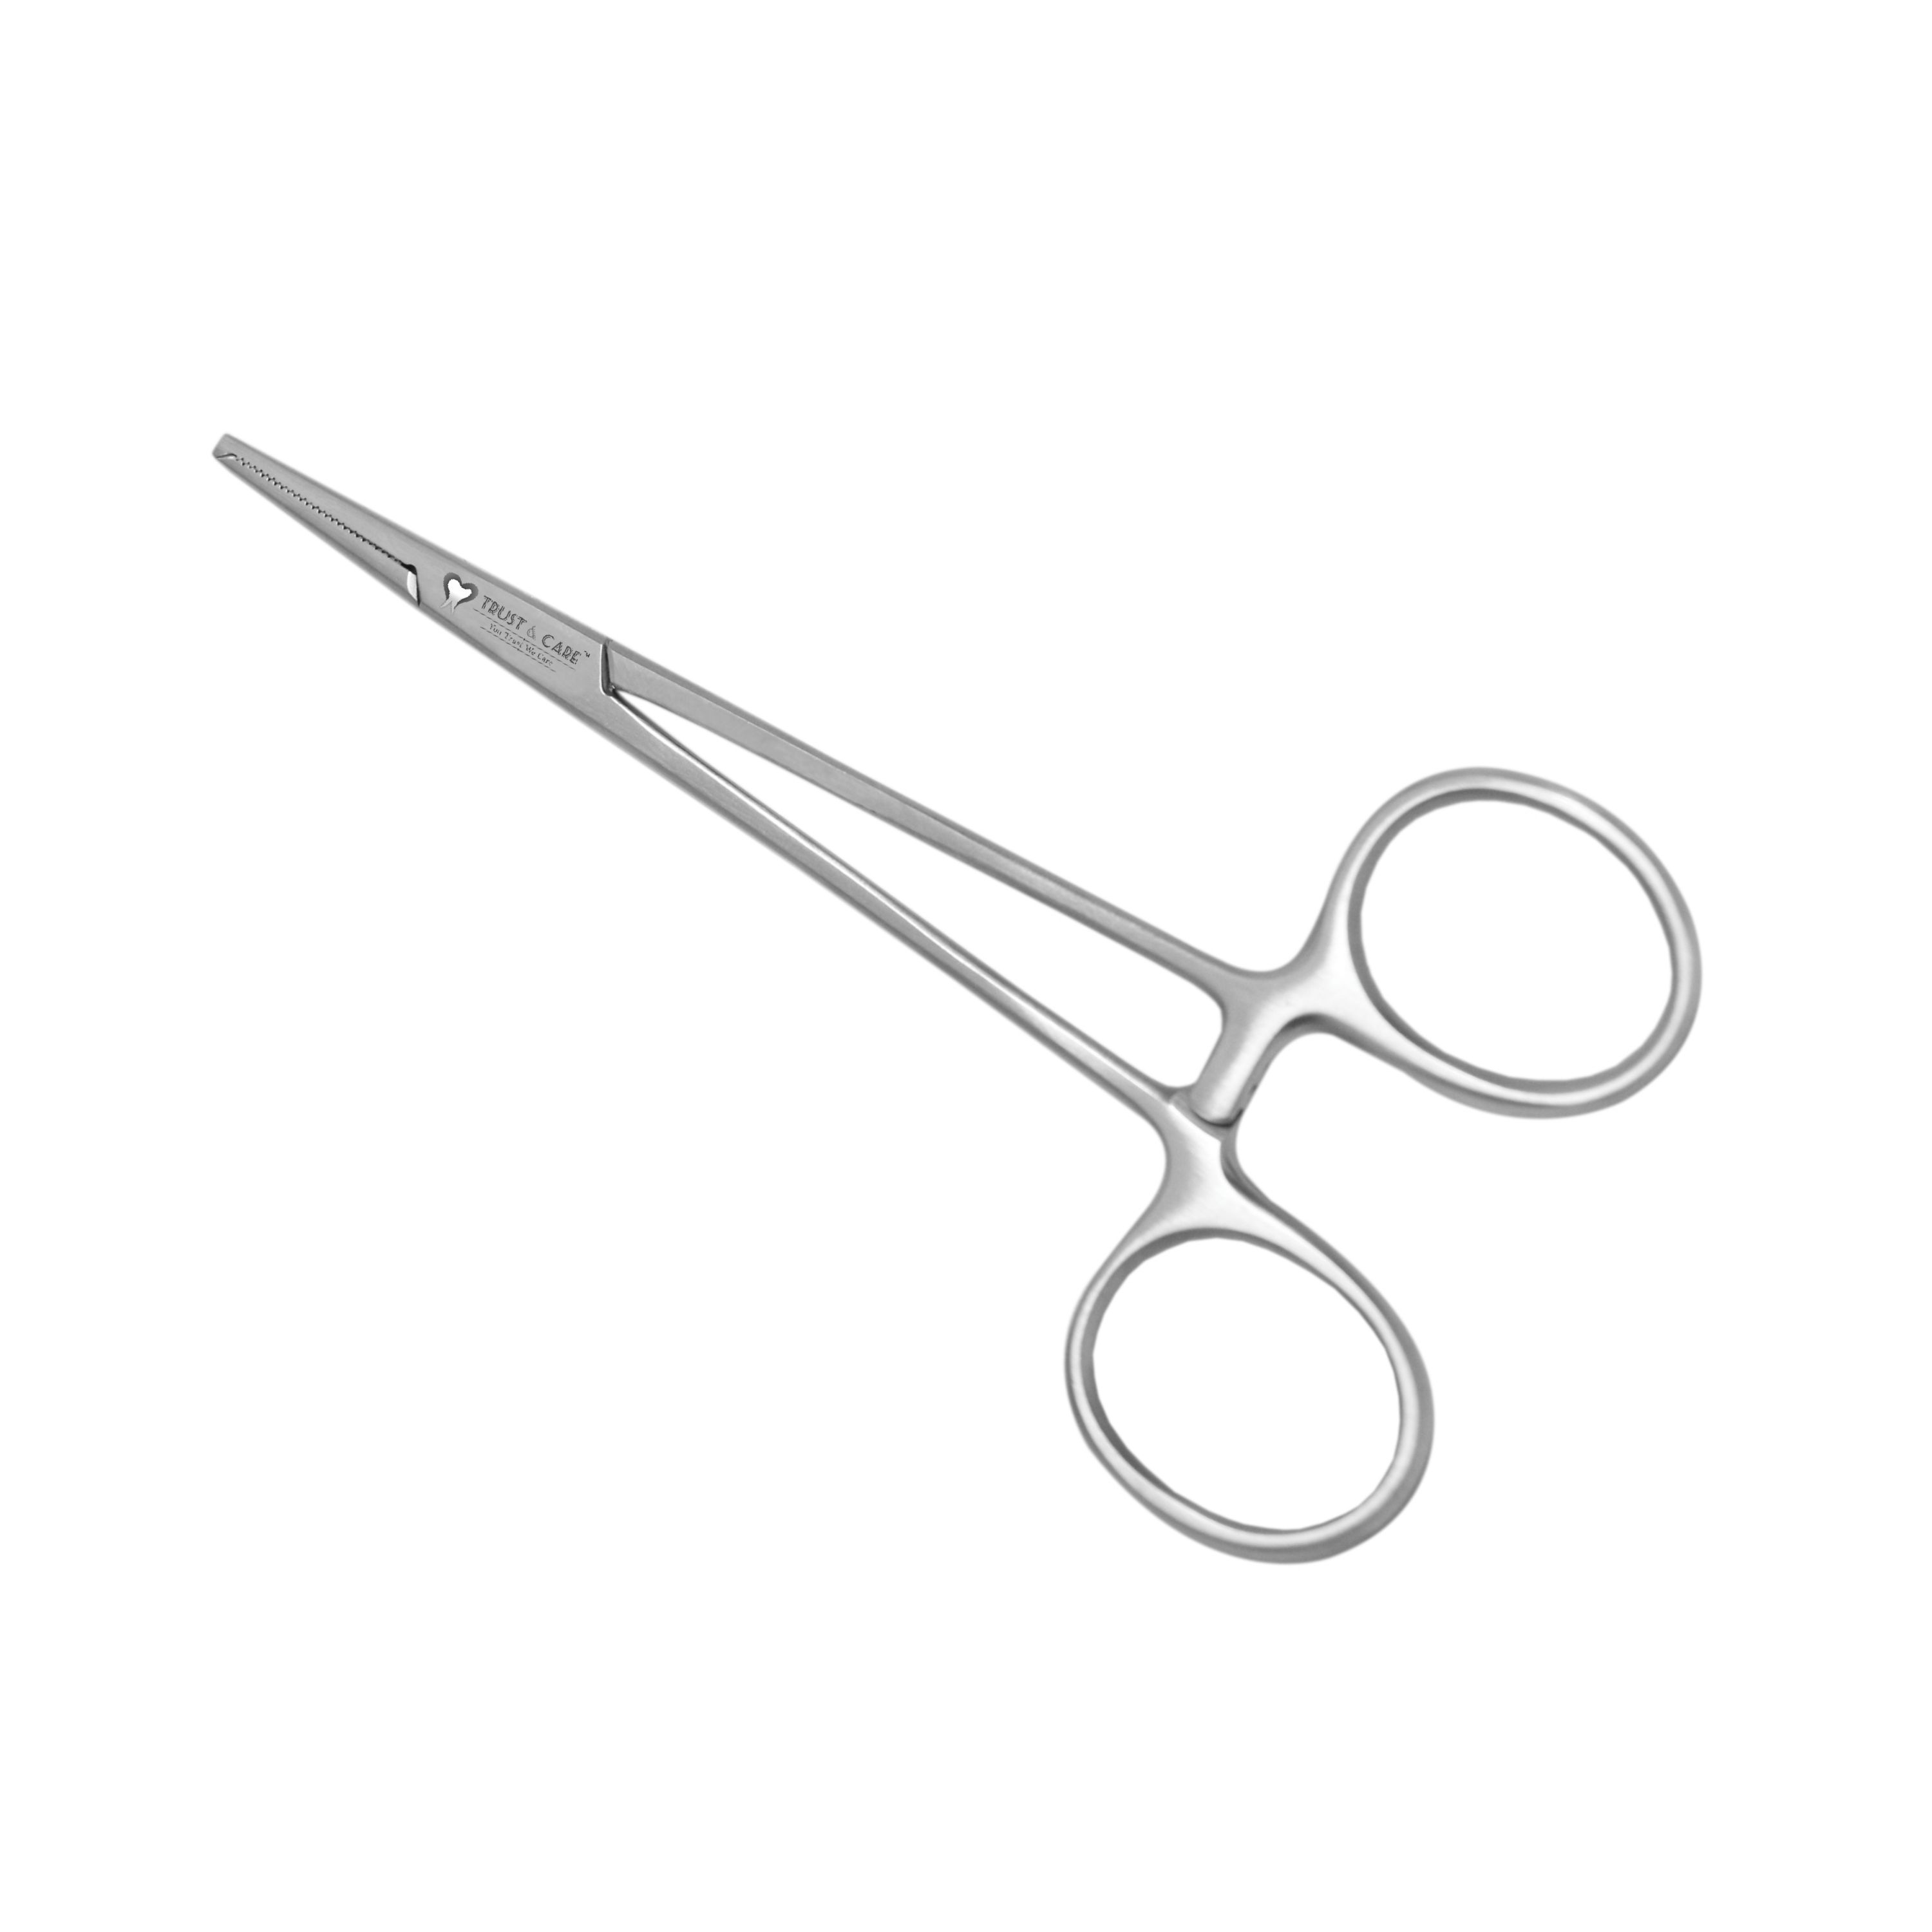 Trust & Care Mosquito With Tooth 1X2 Artery/Hemostats Forceps 12 Cm Straight